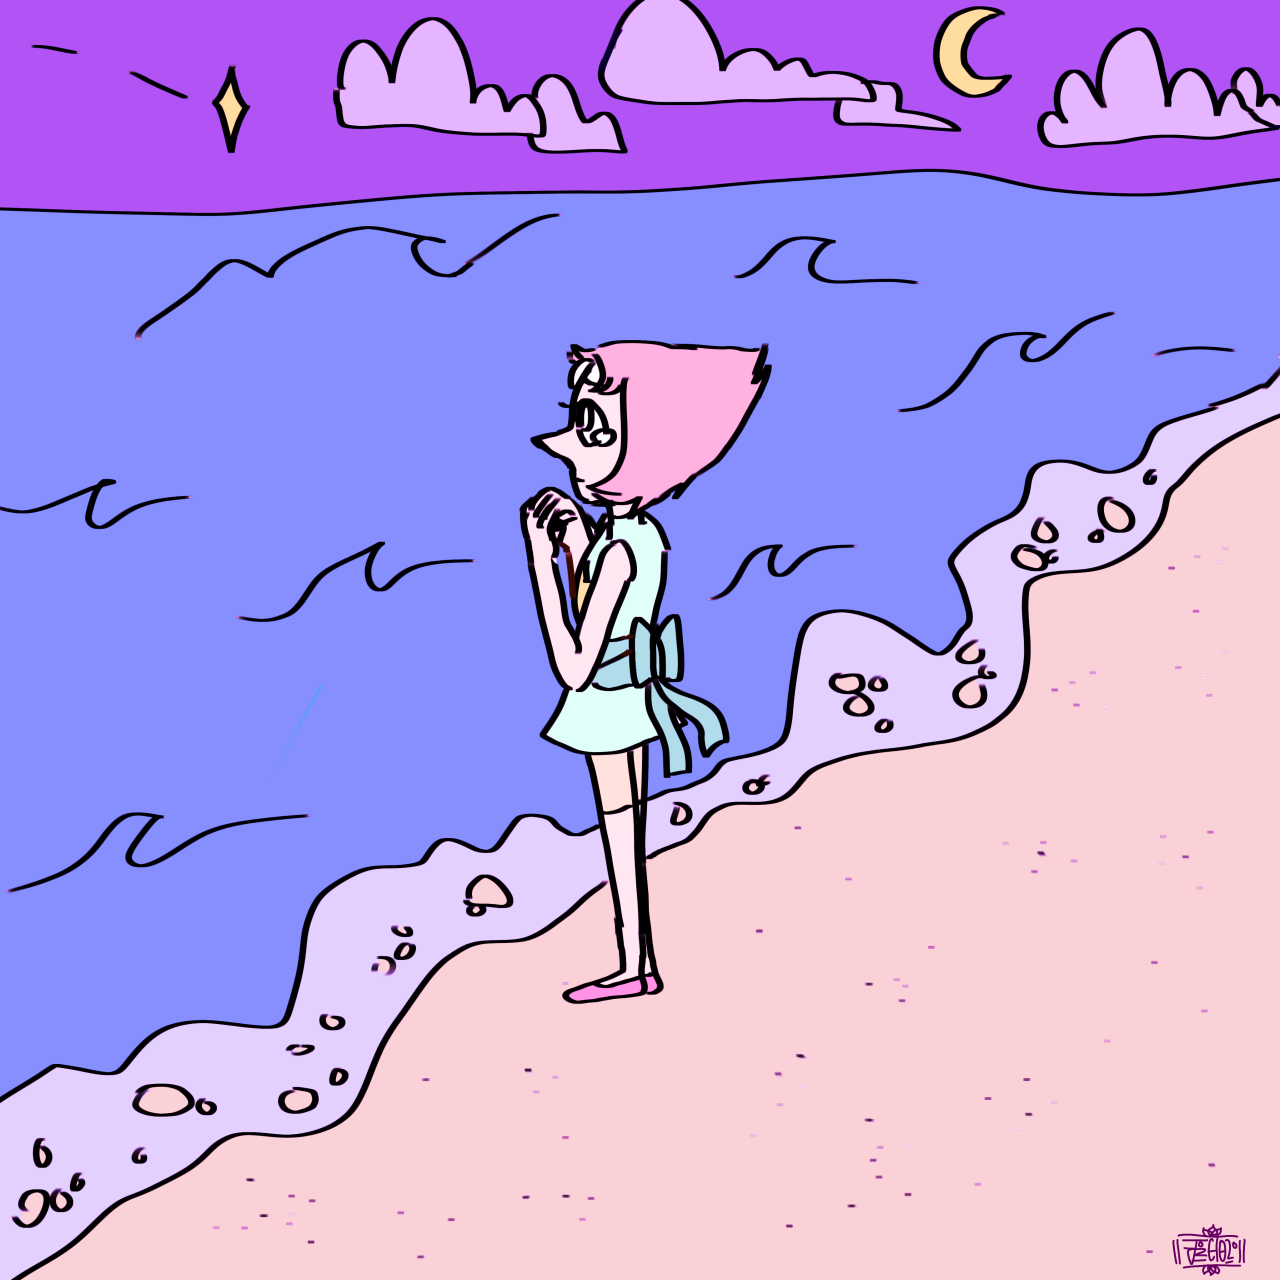 A wishful pearl...
Yes, I know I am total shit at drawing backgrounds. (；´Д｀)